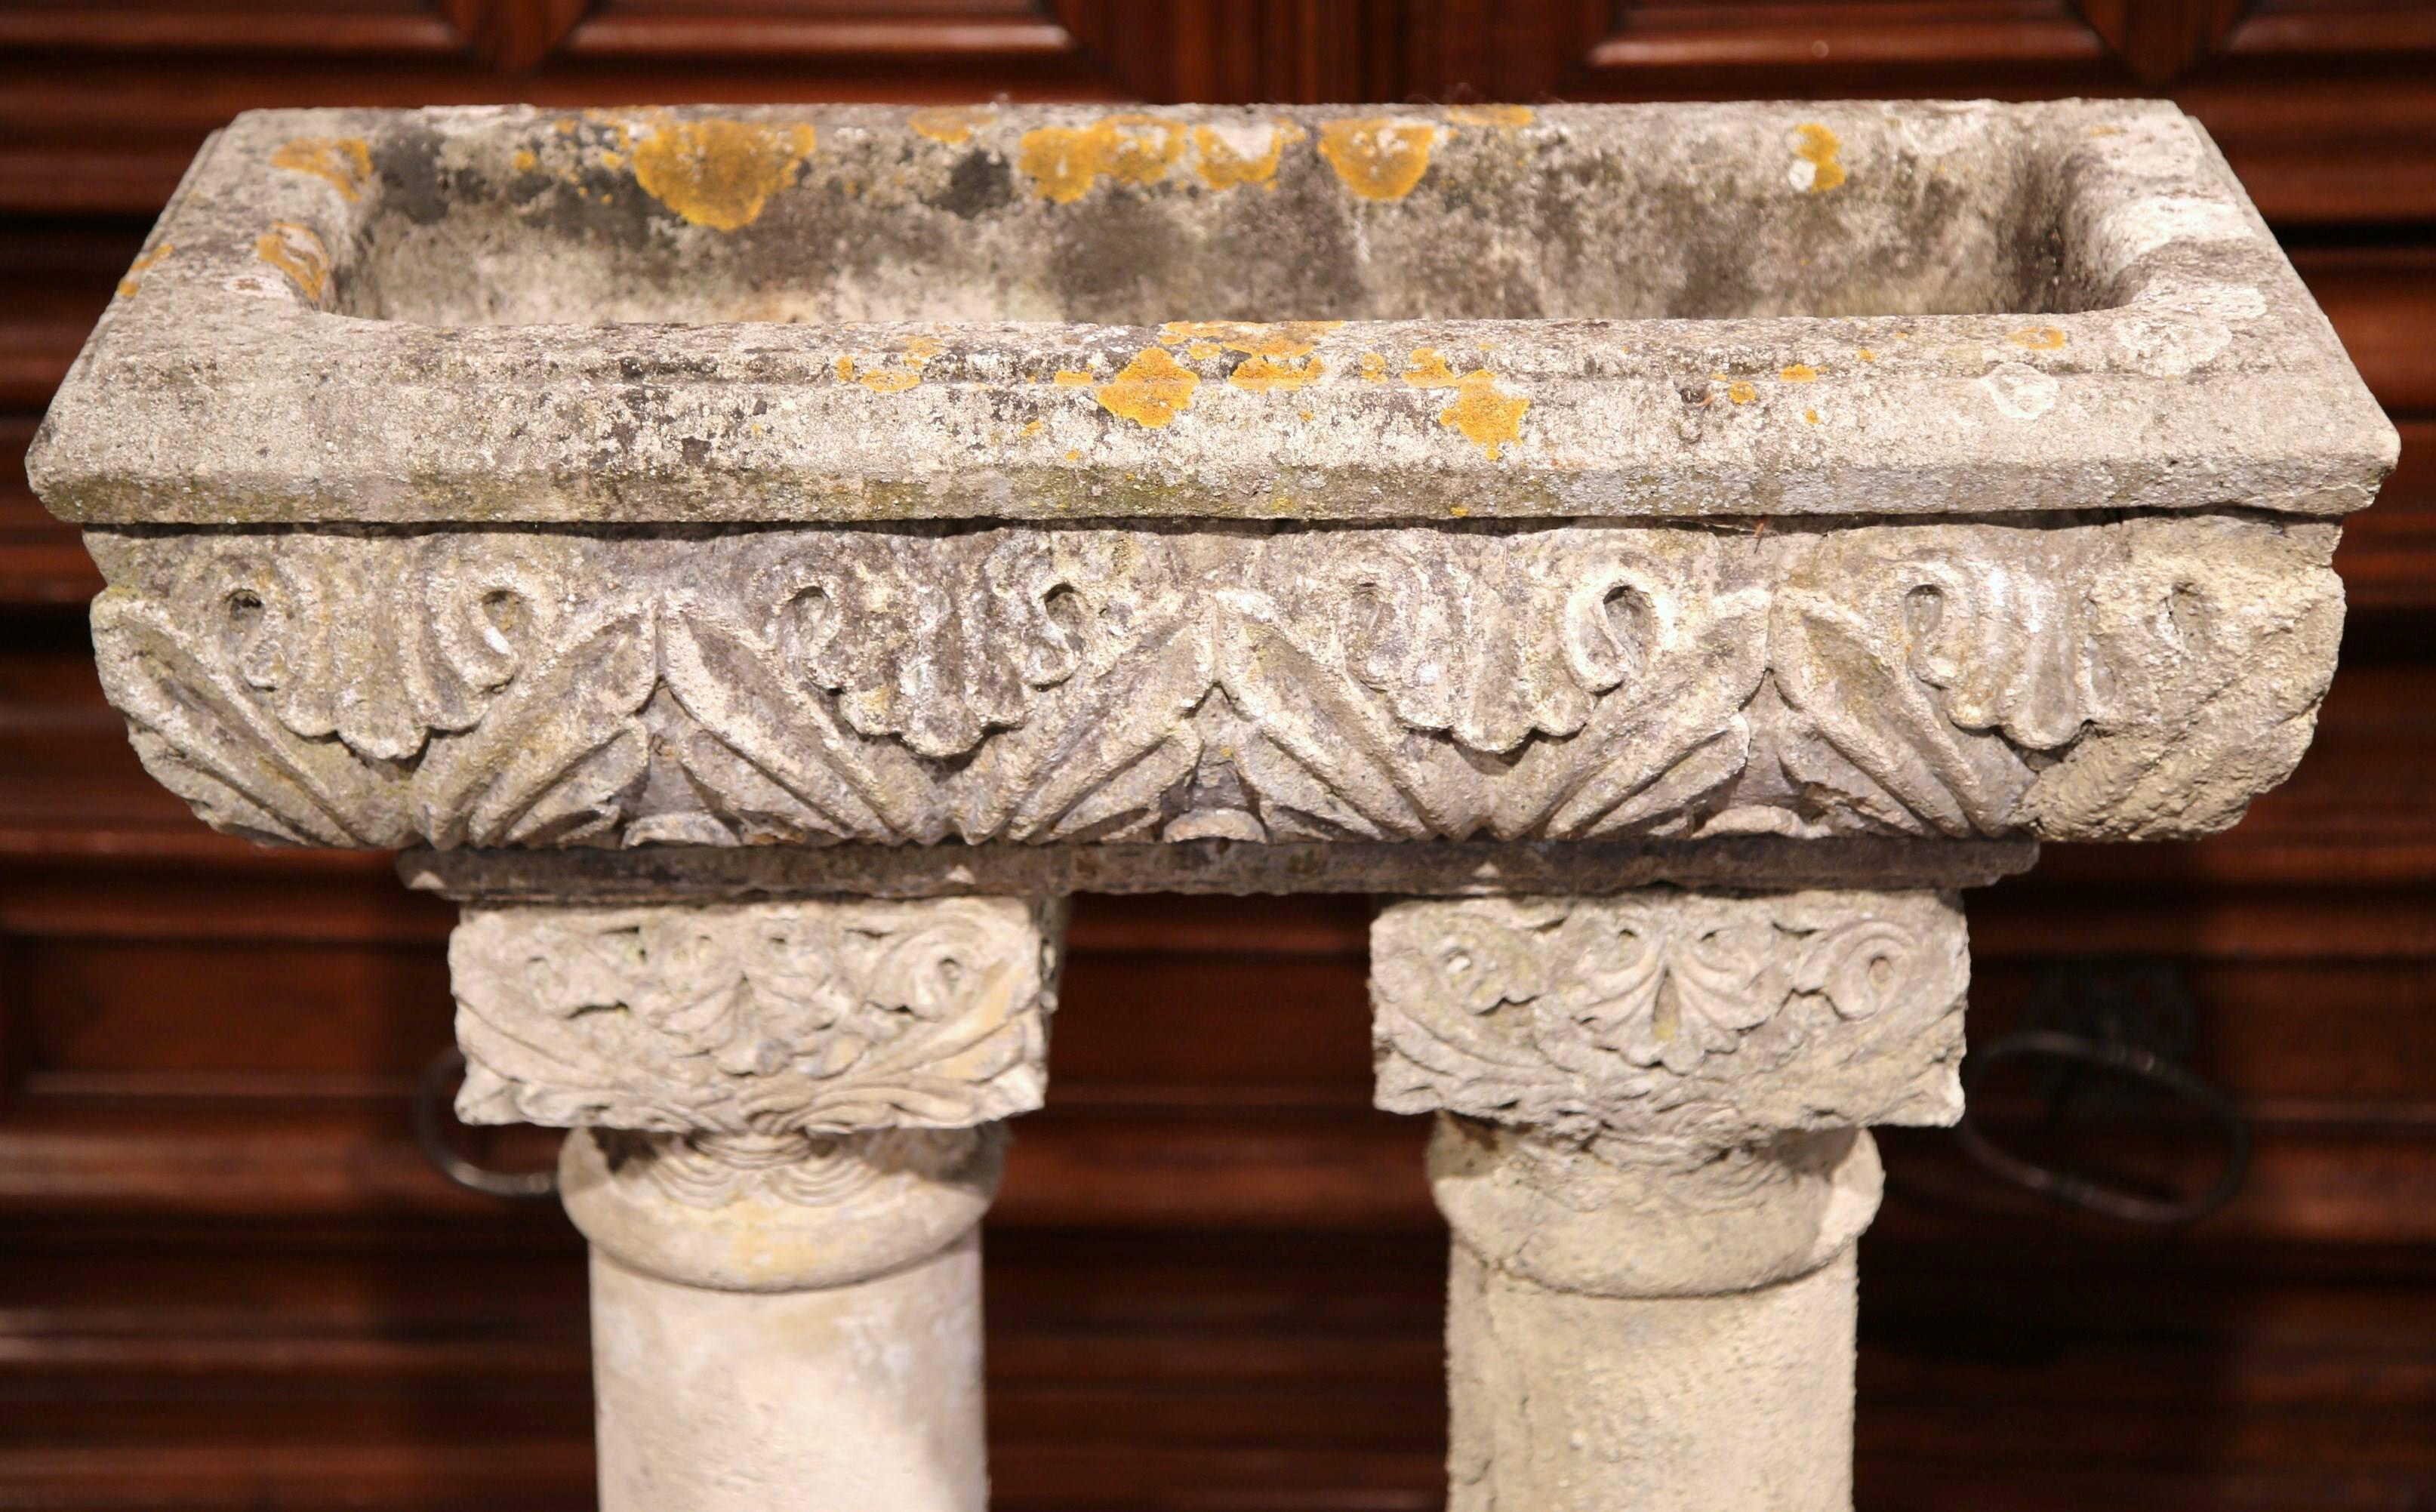 This impressive, antique cast stone planter was carved on the Normand coast of France, circa 1850. Made in two sections, this garden jardiniere features two circular columns on stepped rectangular base with a rectangular flower holder sitting on top